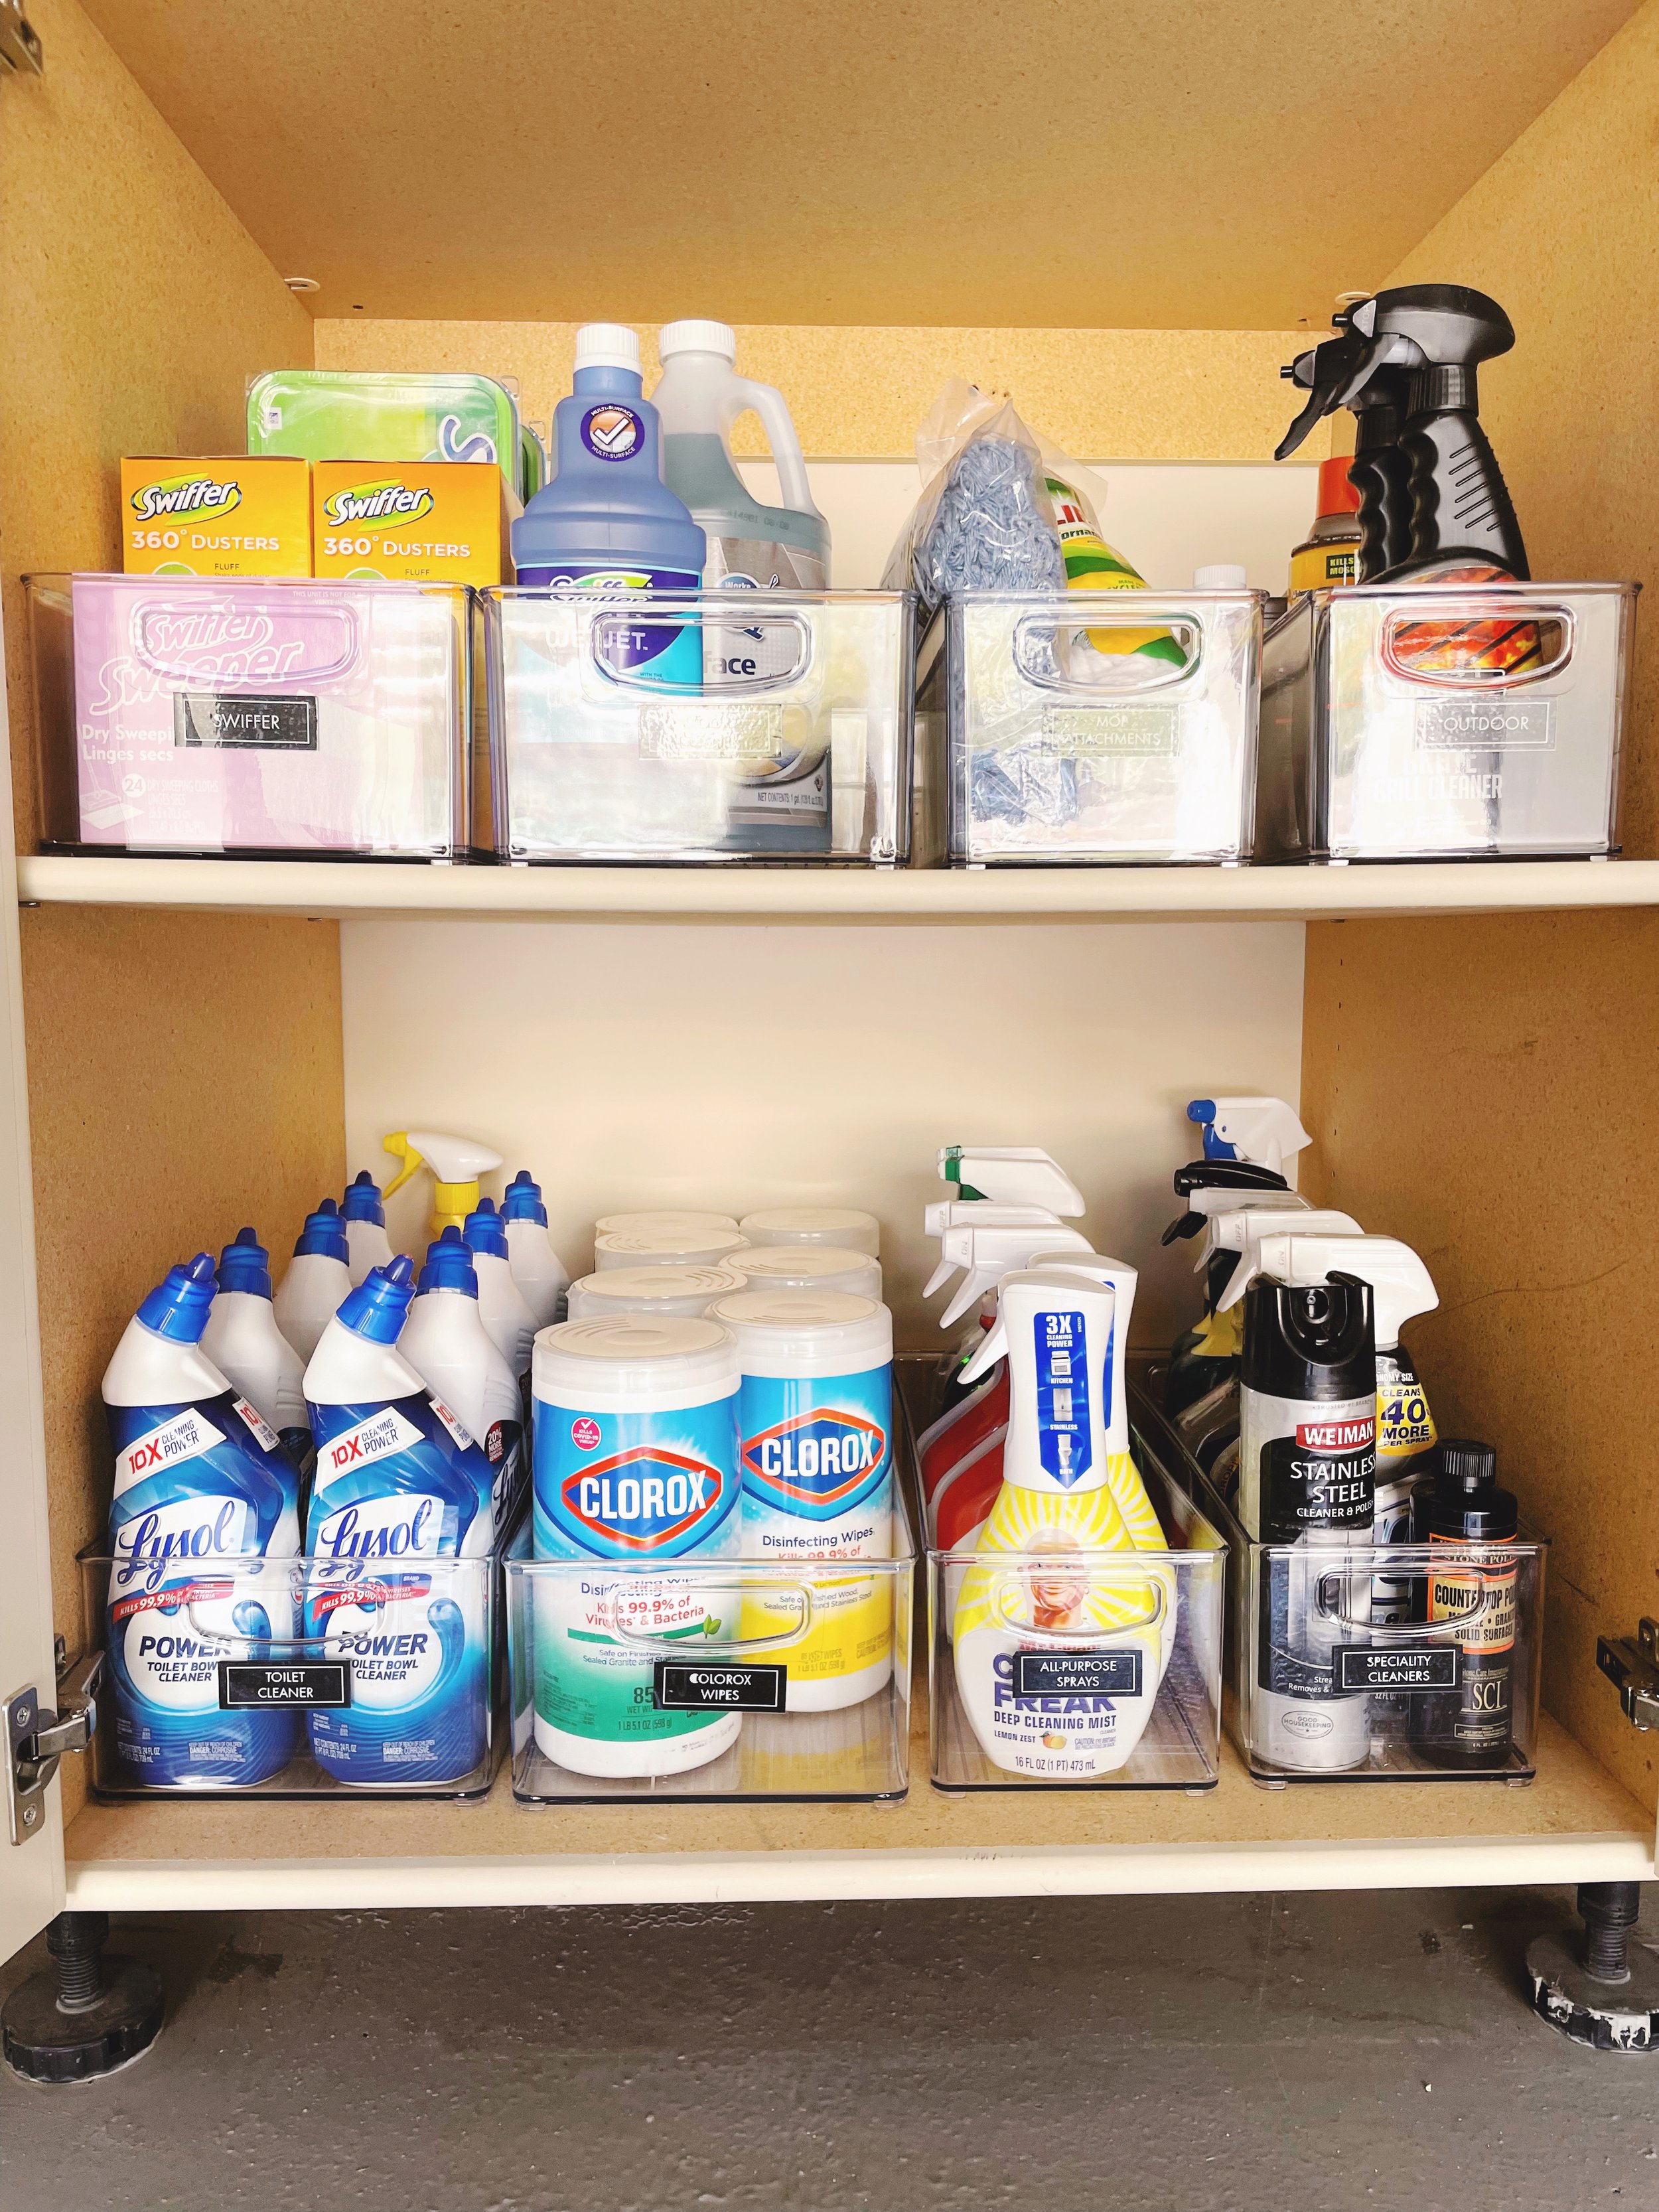 Cleaning Supplies, Household Items & Storage - Food 4 Less